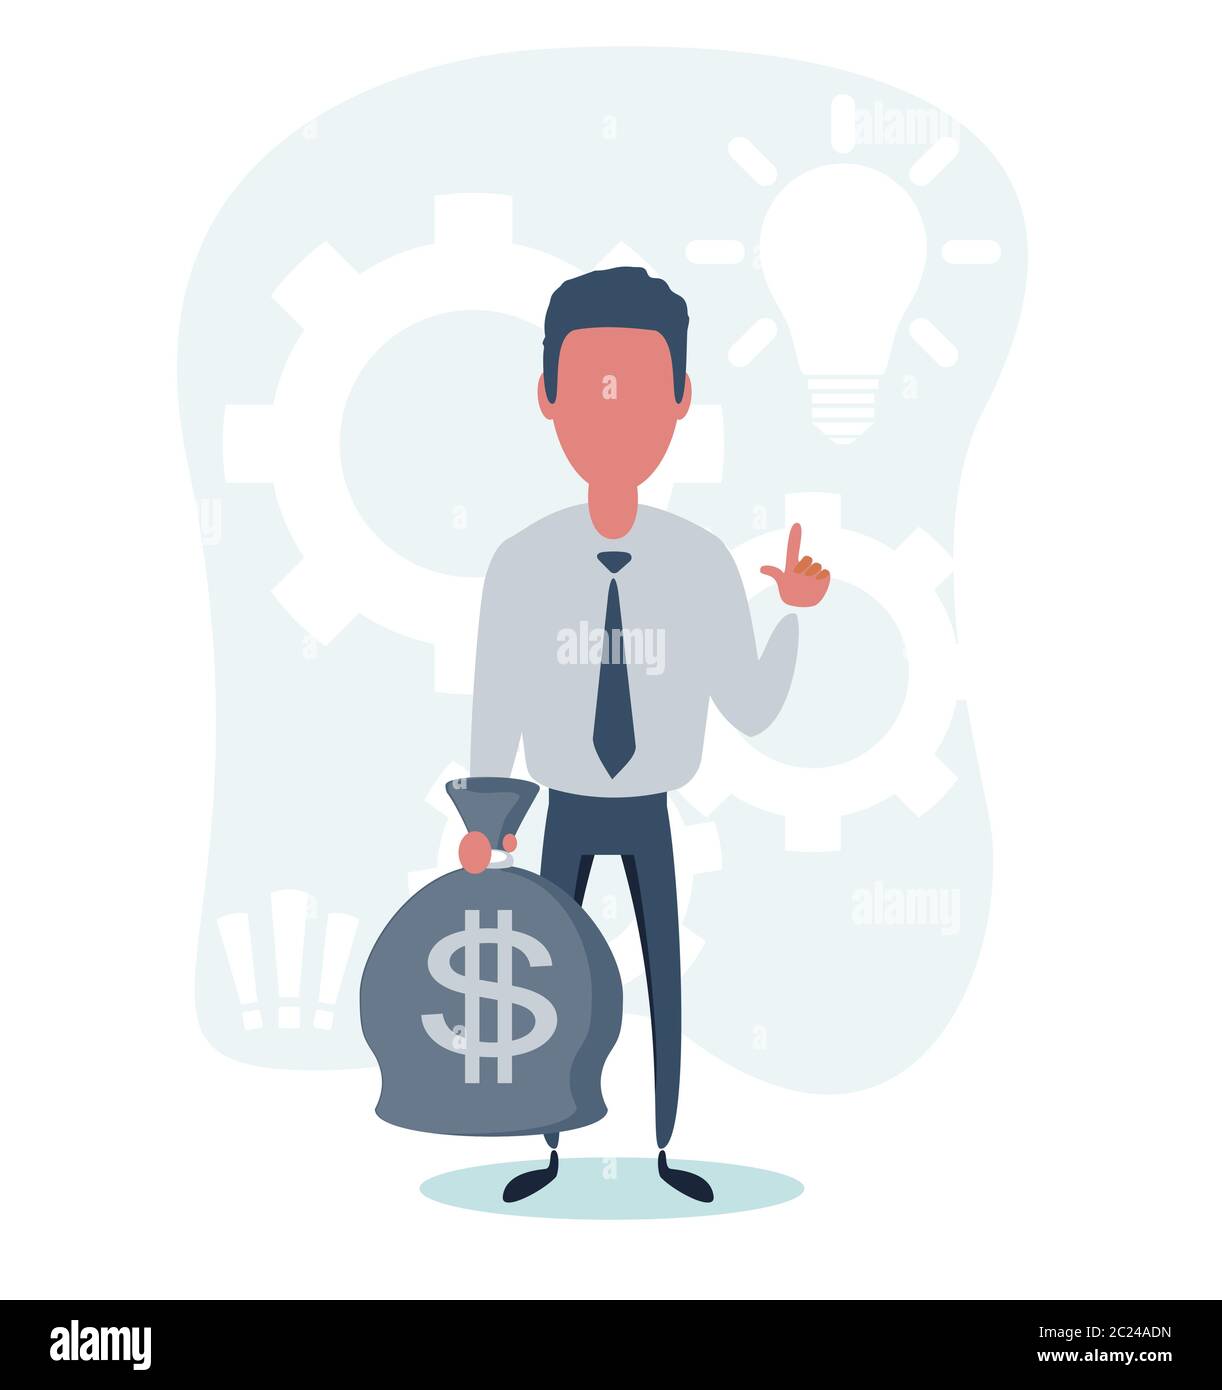 Business man character hold bags full of money. Stock Vector